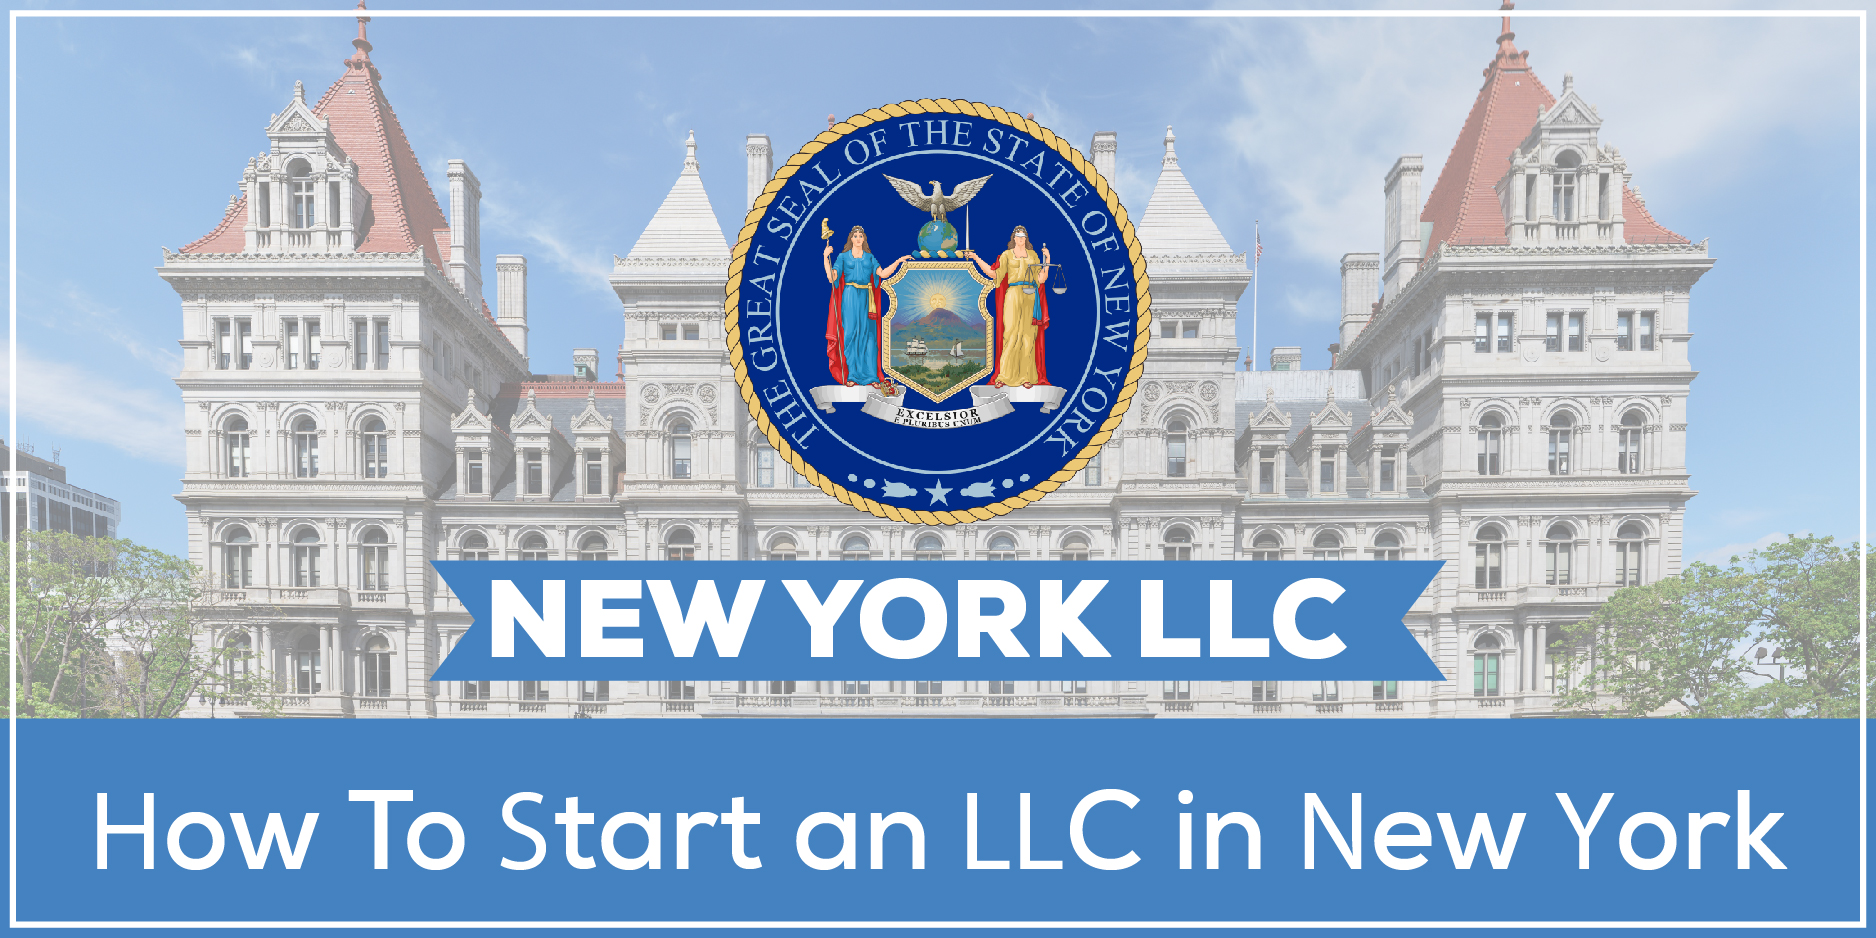 How To Start an LLC in New York